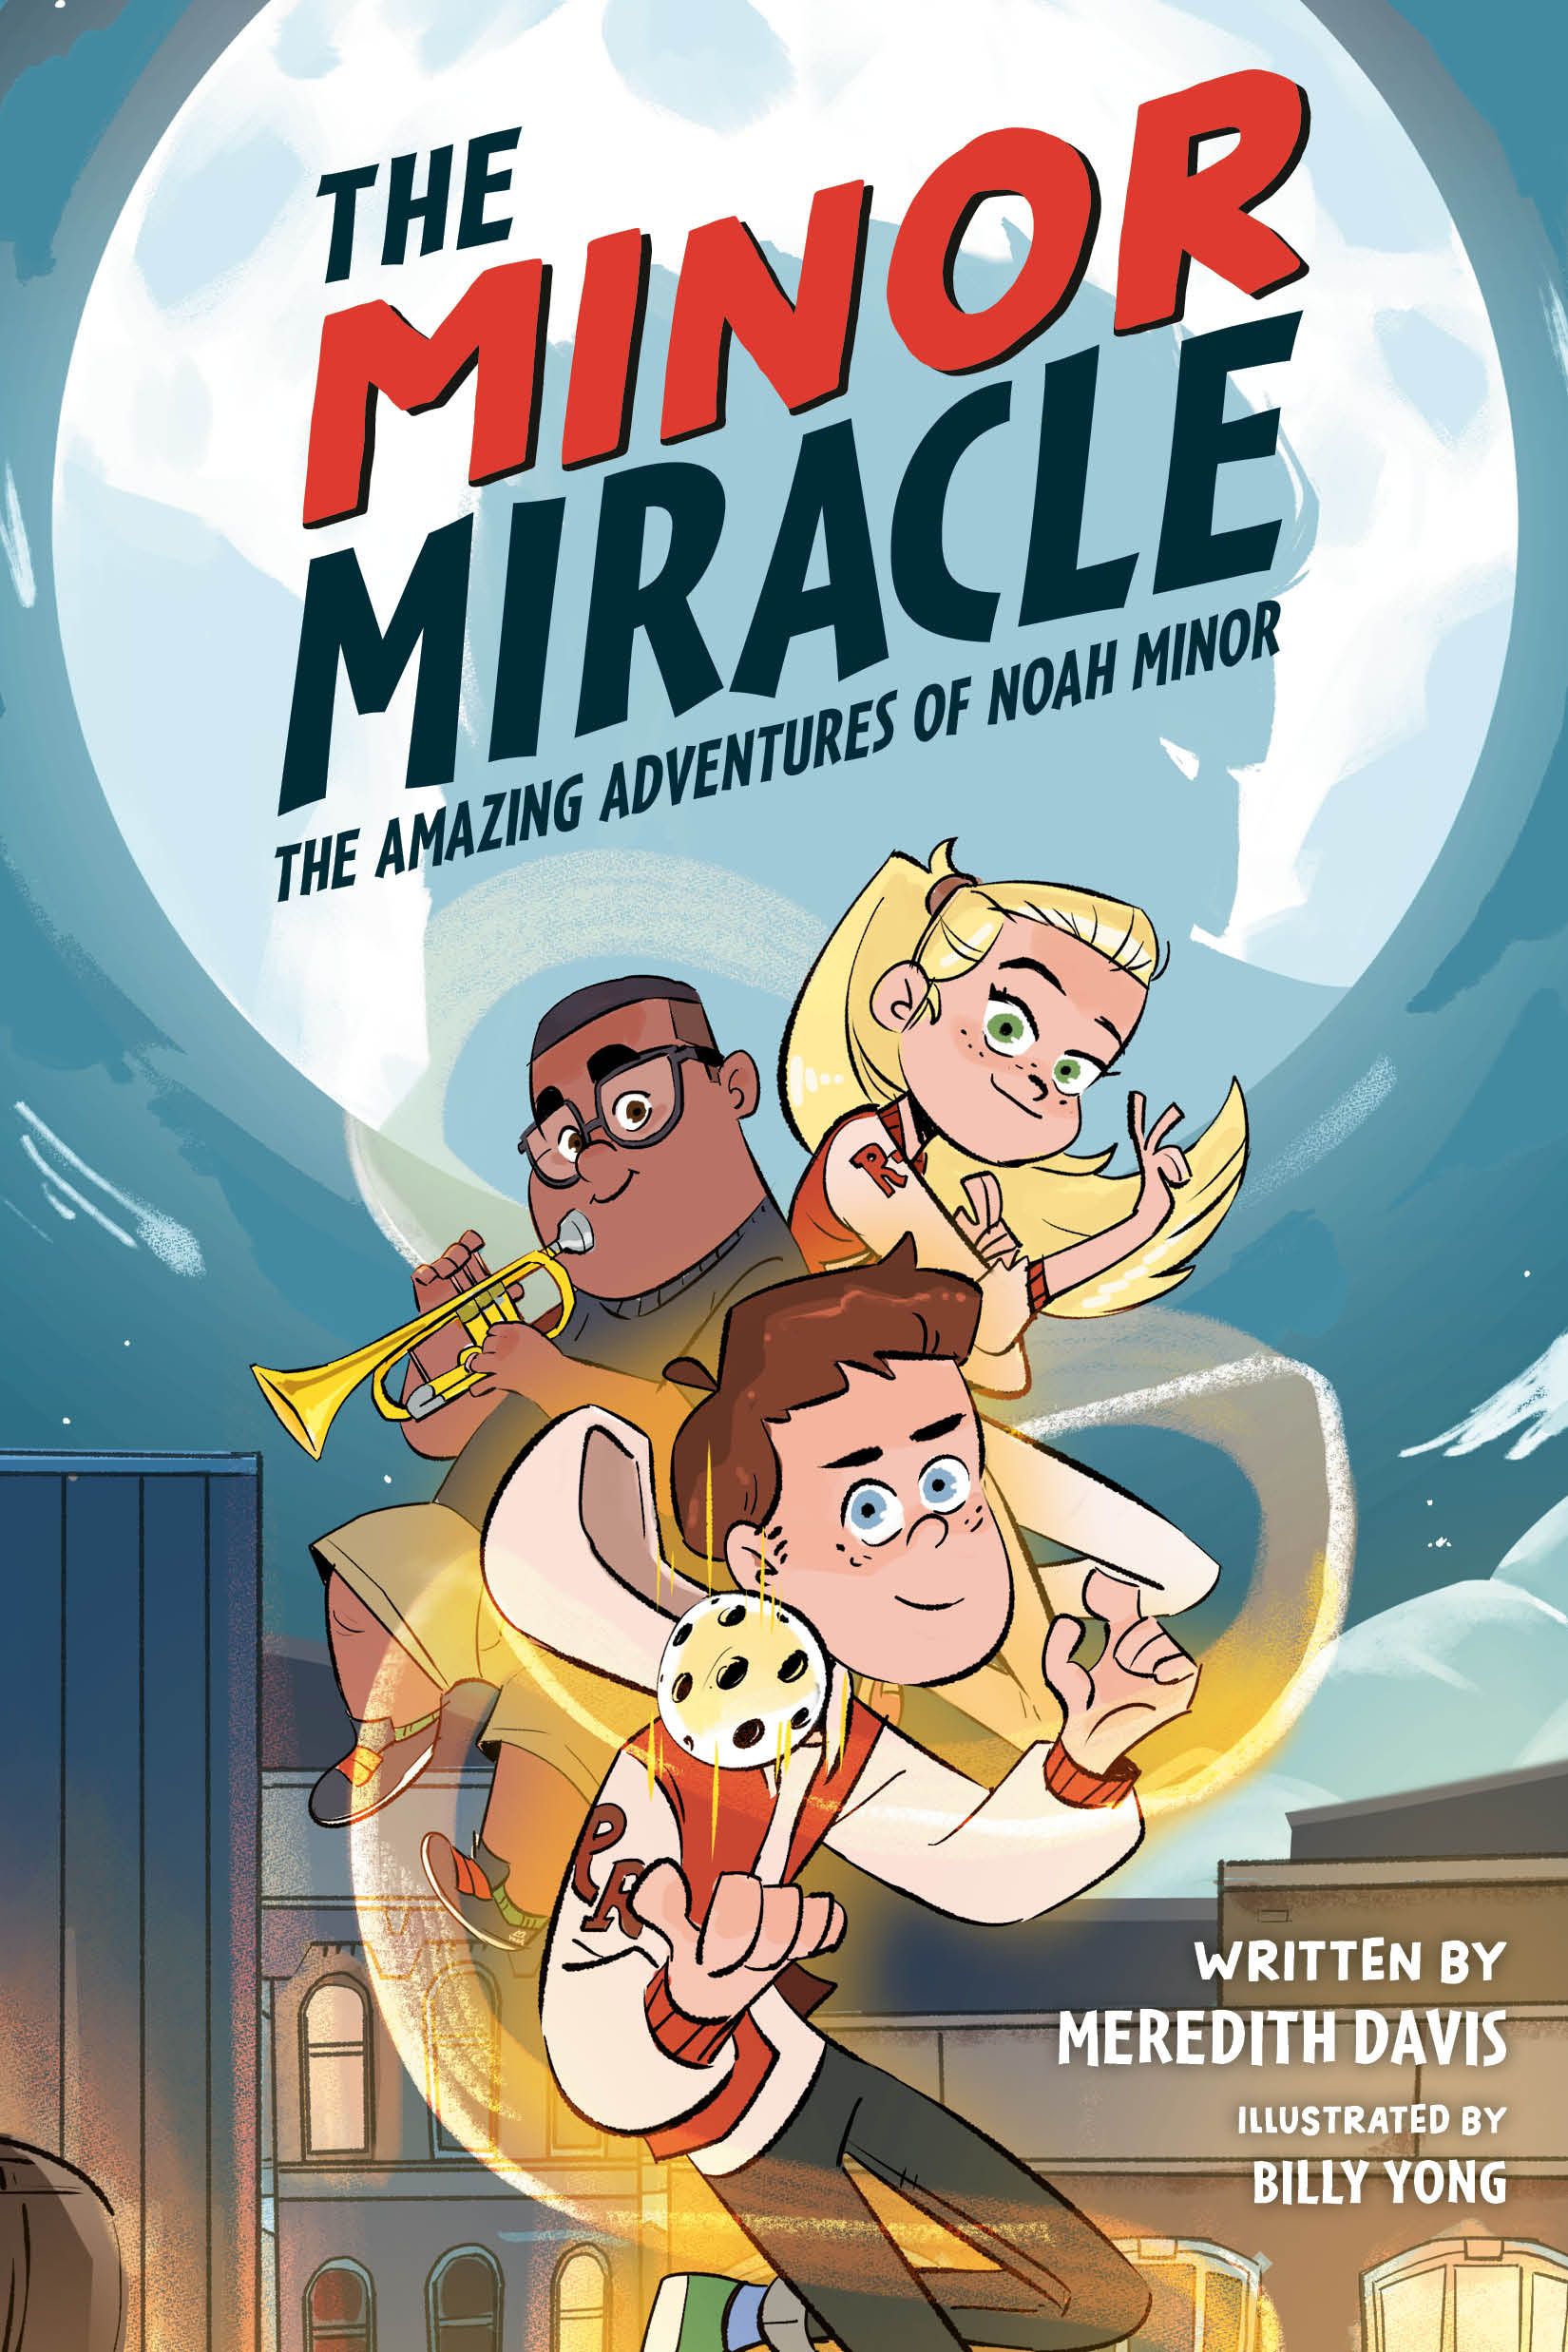 Download The Minor Miracle: The Amazing Adventures of Noah Minor PDF by Meredith Davis